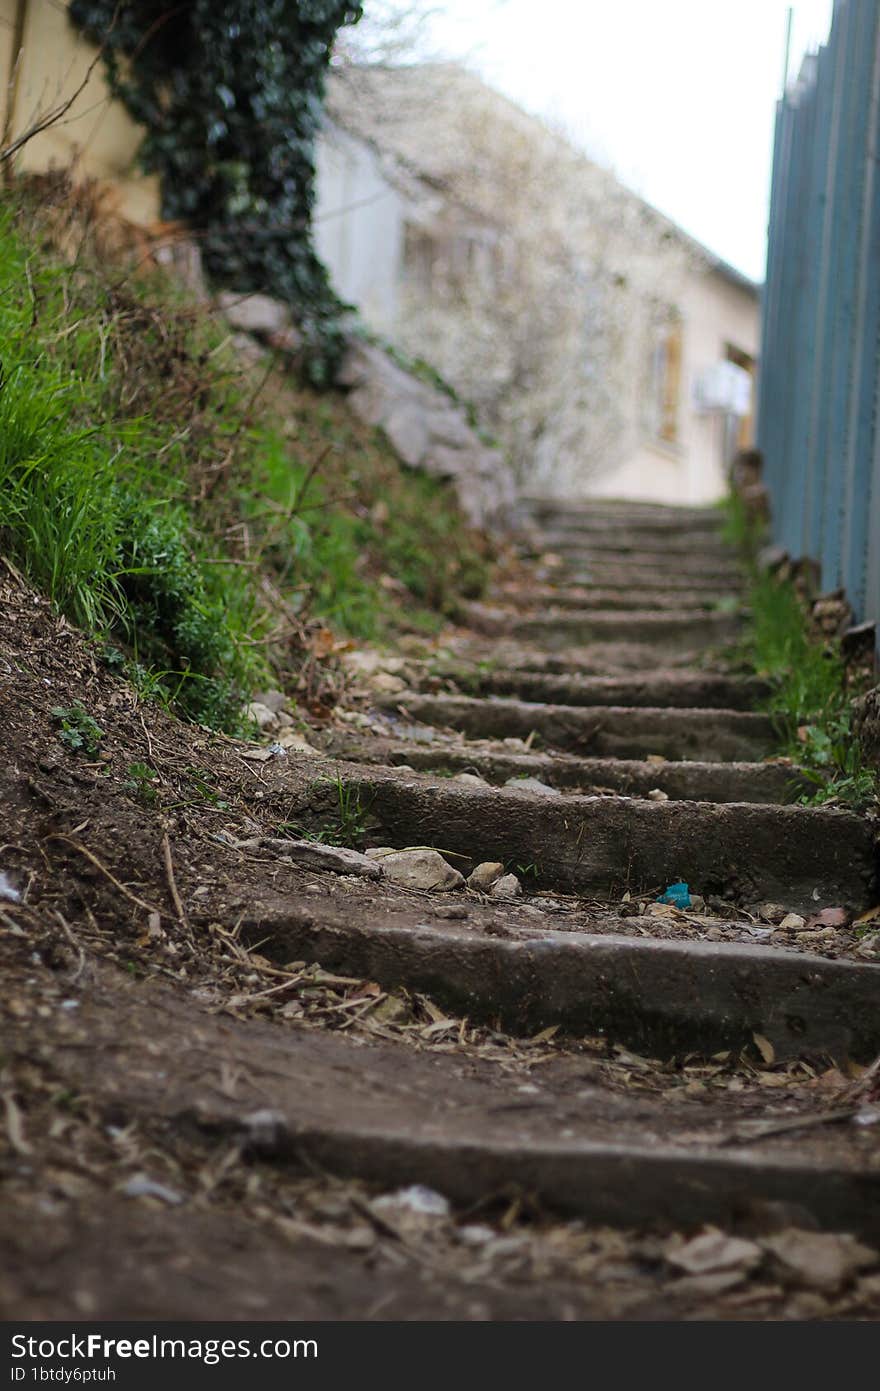 An old staircase on the street. The old district of the city on a hill. Dirty stairs.